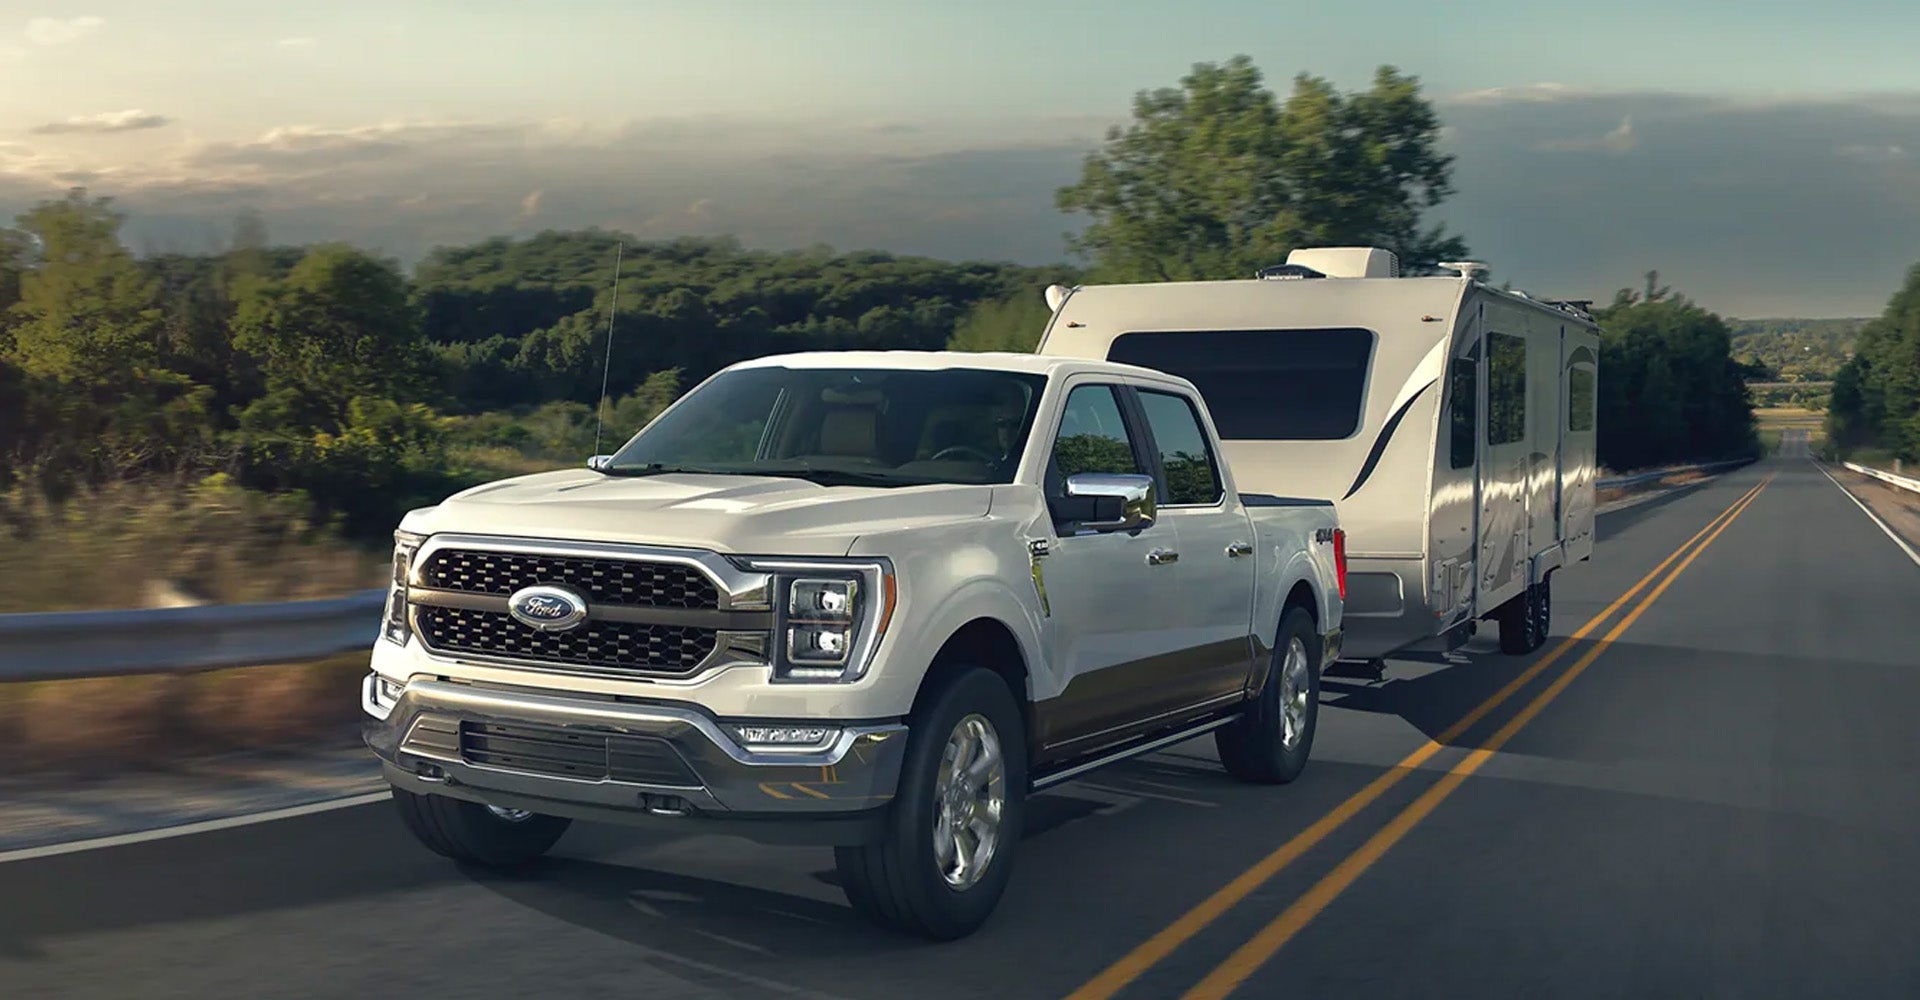 Ford F-150 Towing Payload Capacity